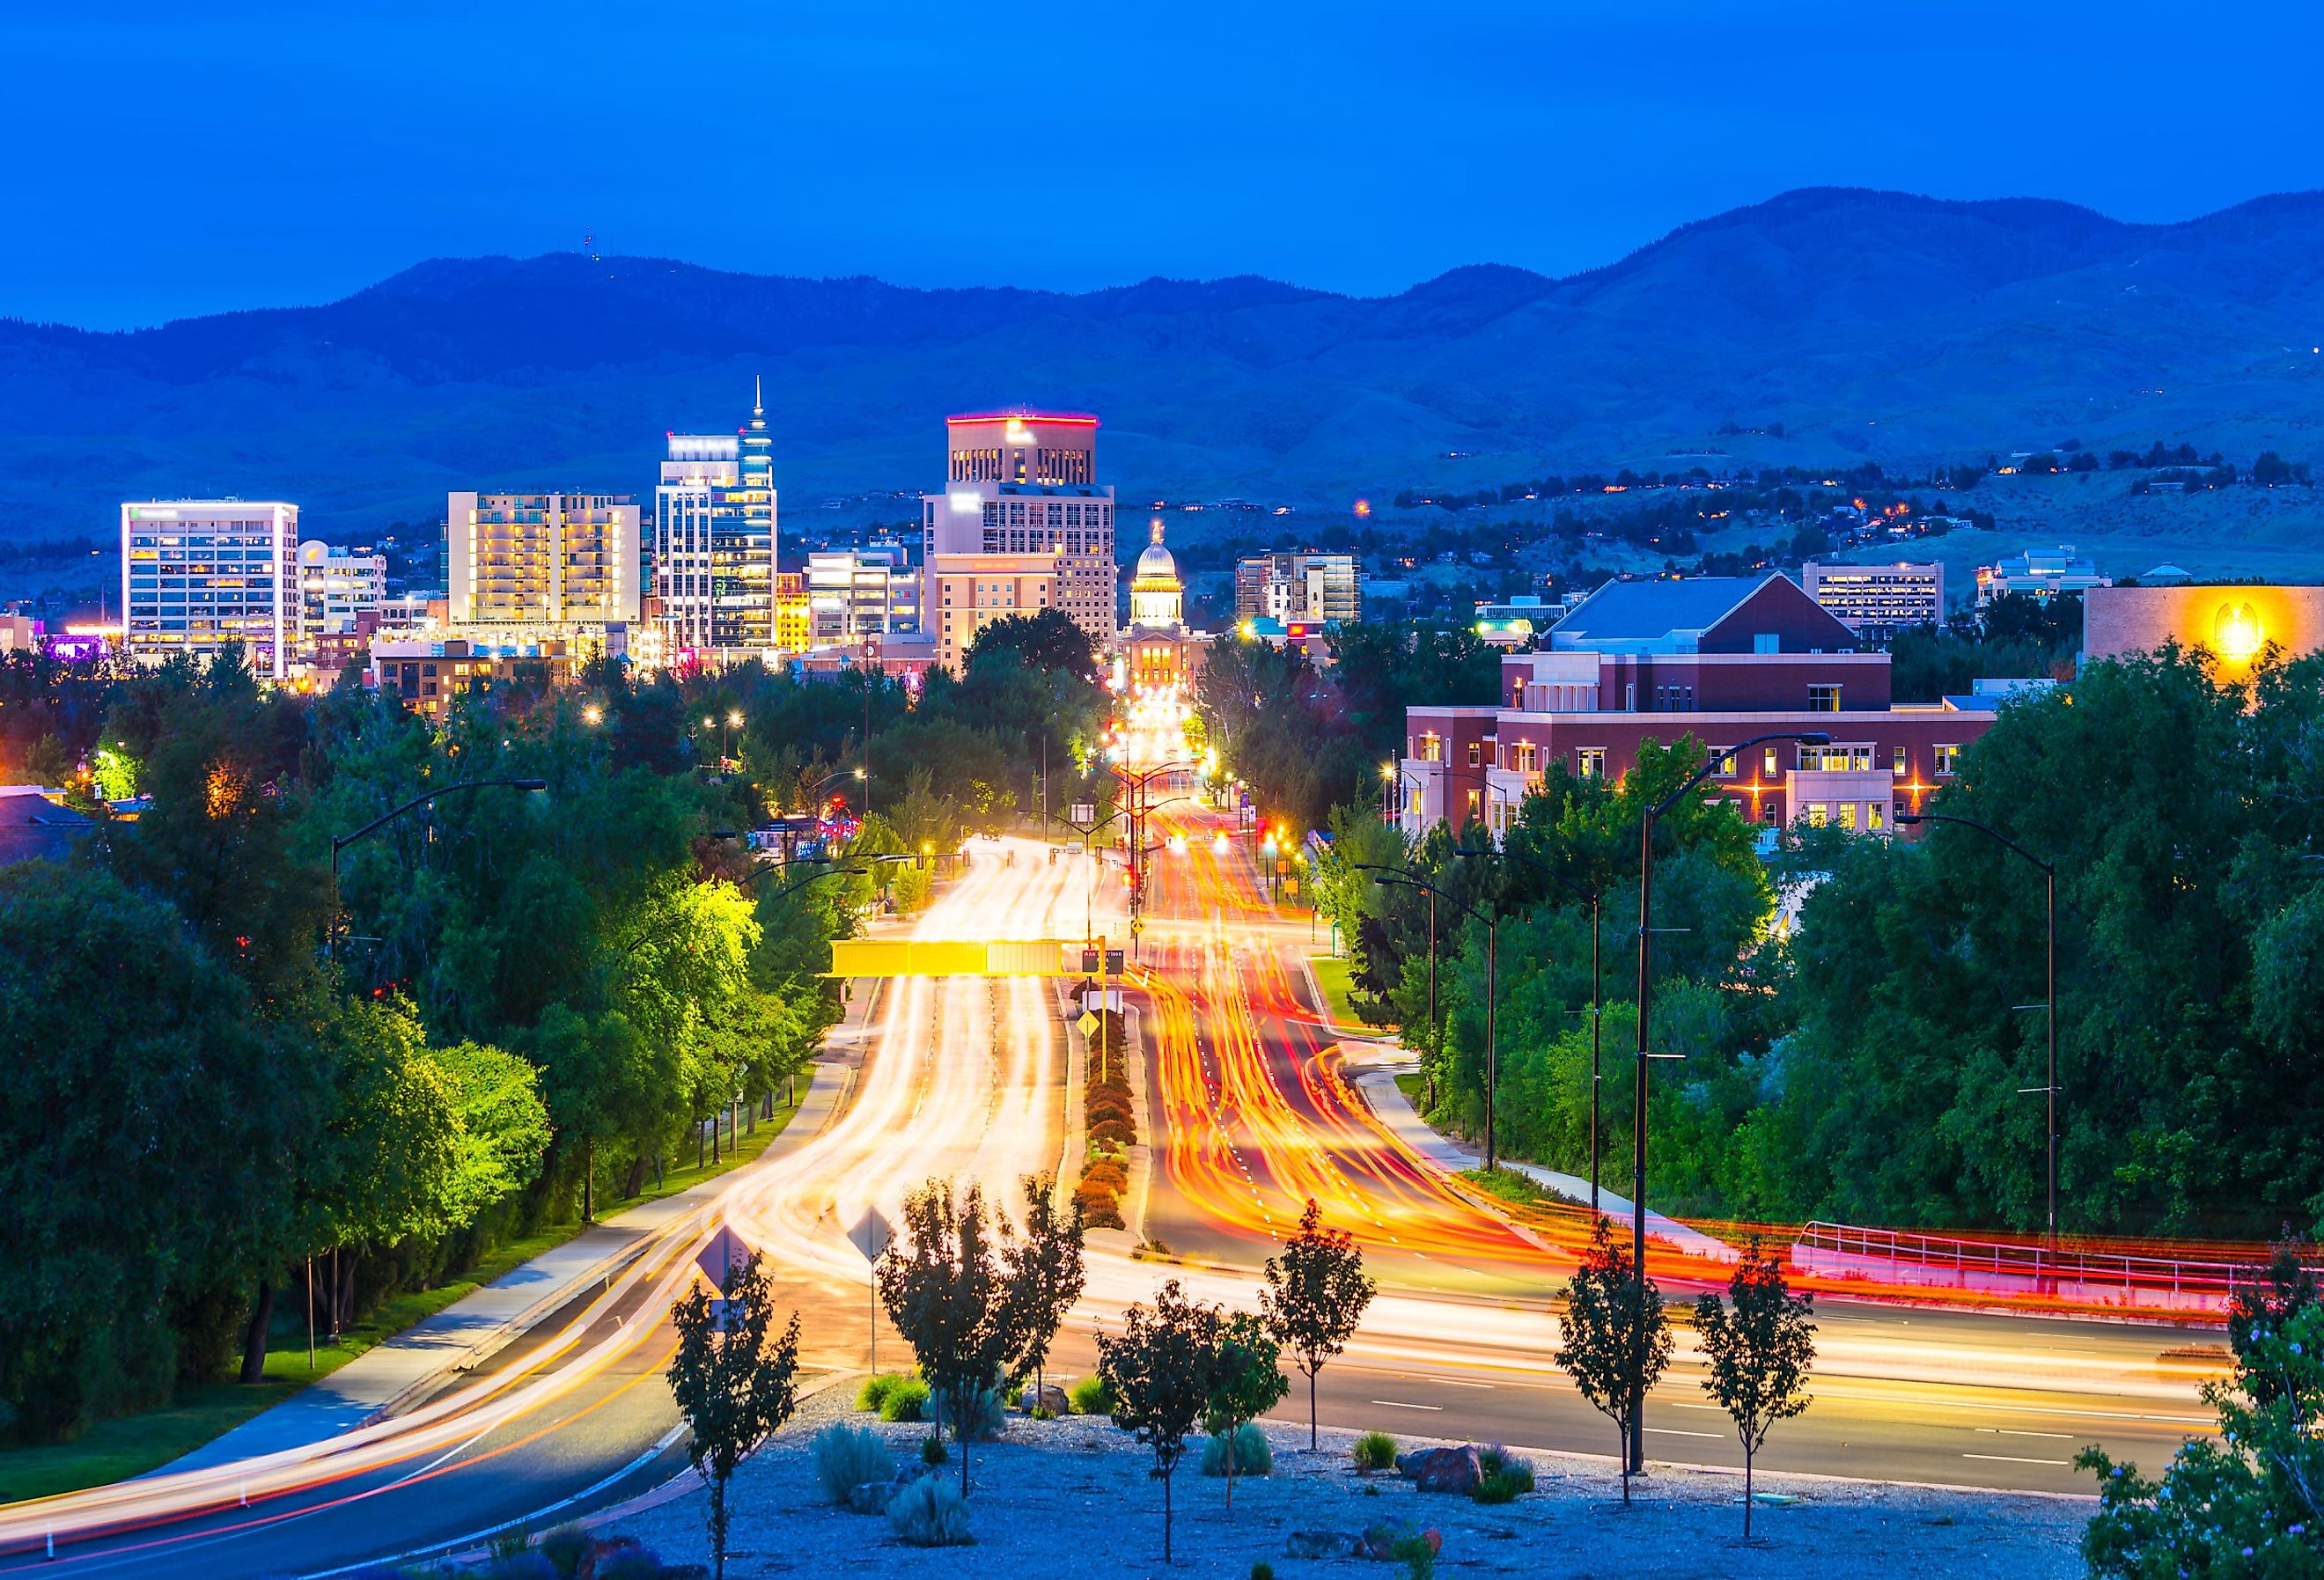 Boise, Idaho cityscape at night with traffic lights and Rocky Mountains in the background. Image credit Checubus via Shutterstock.